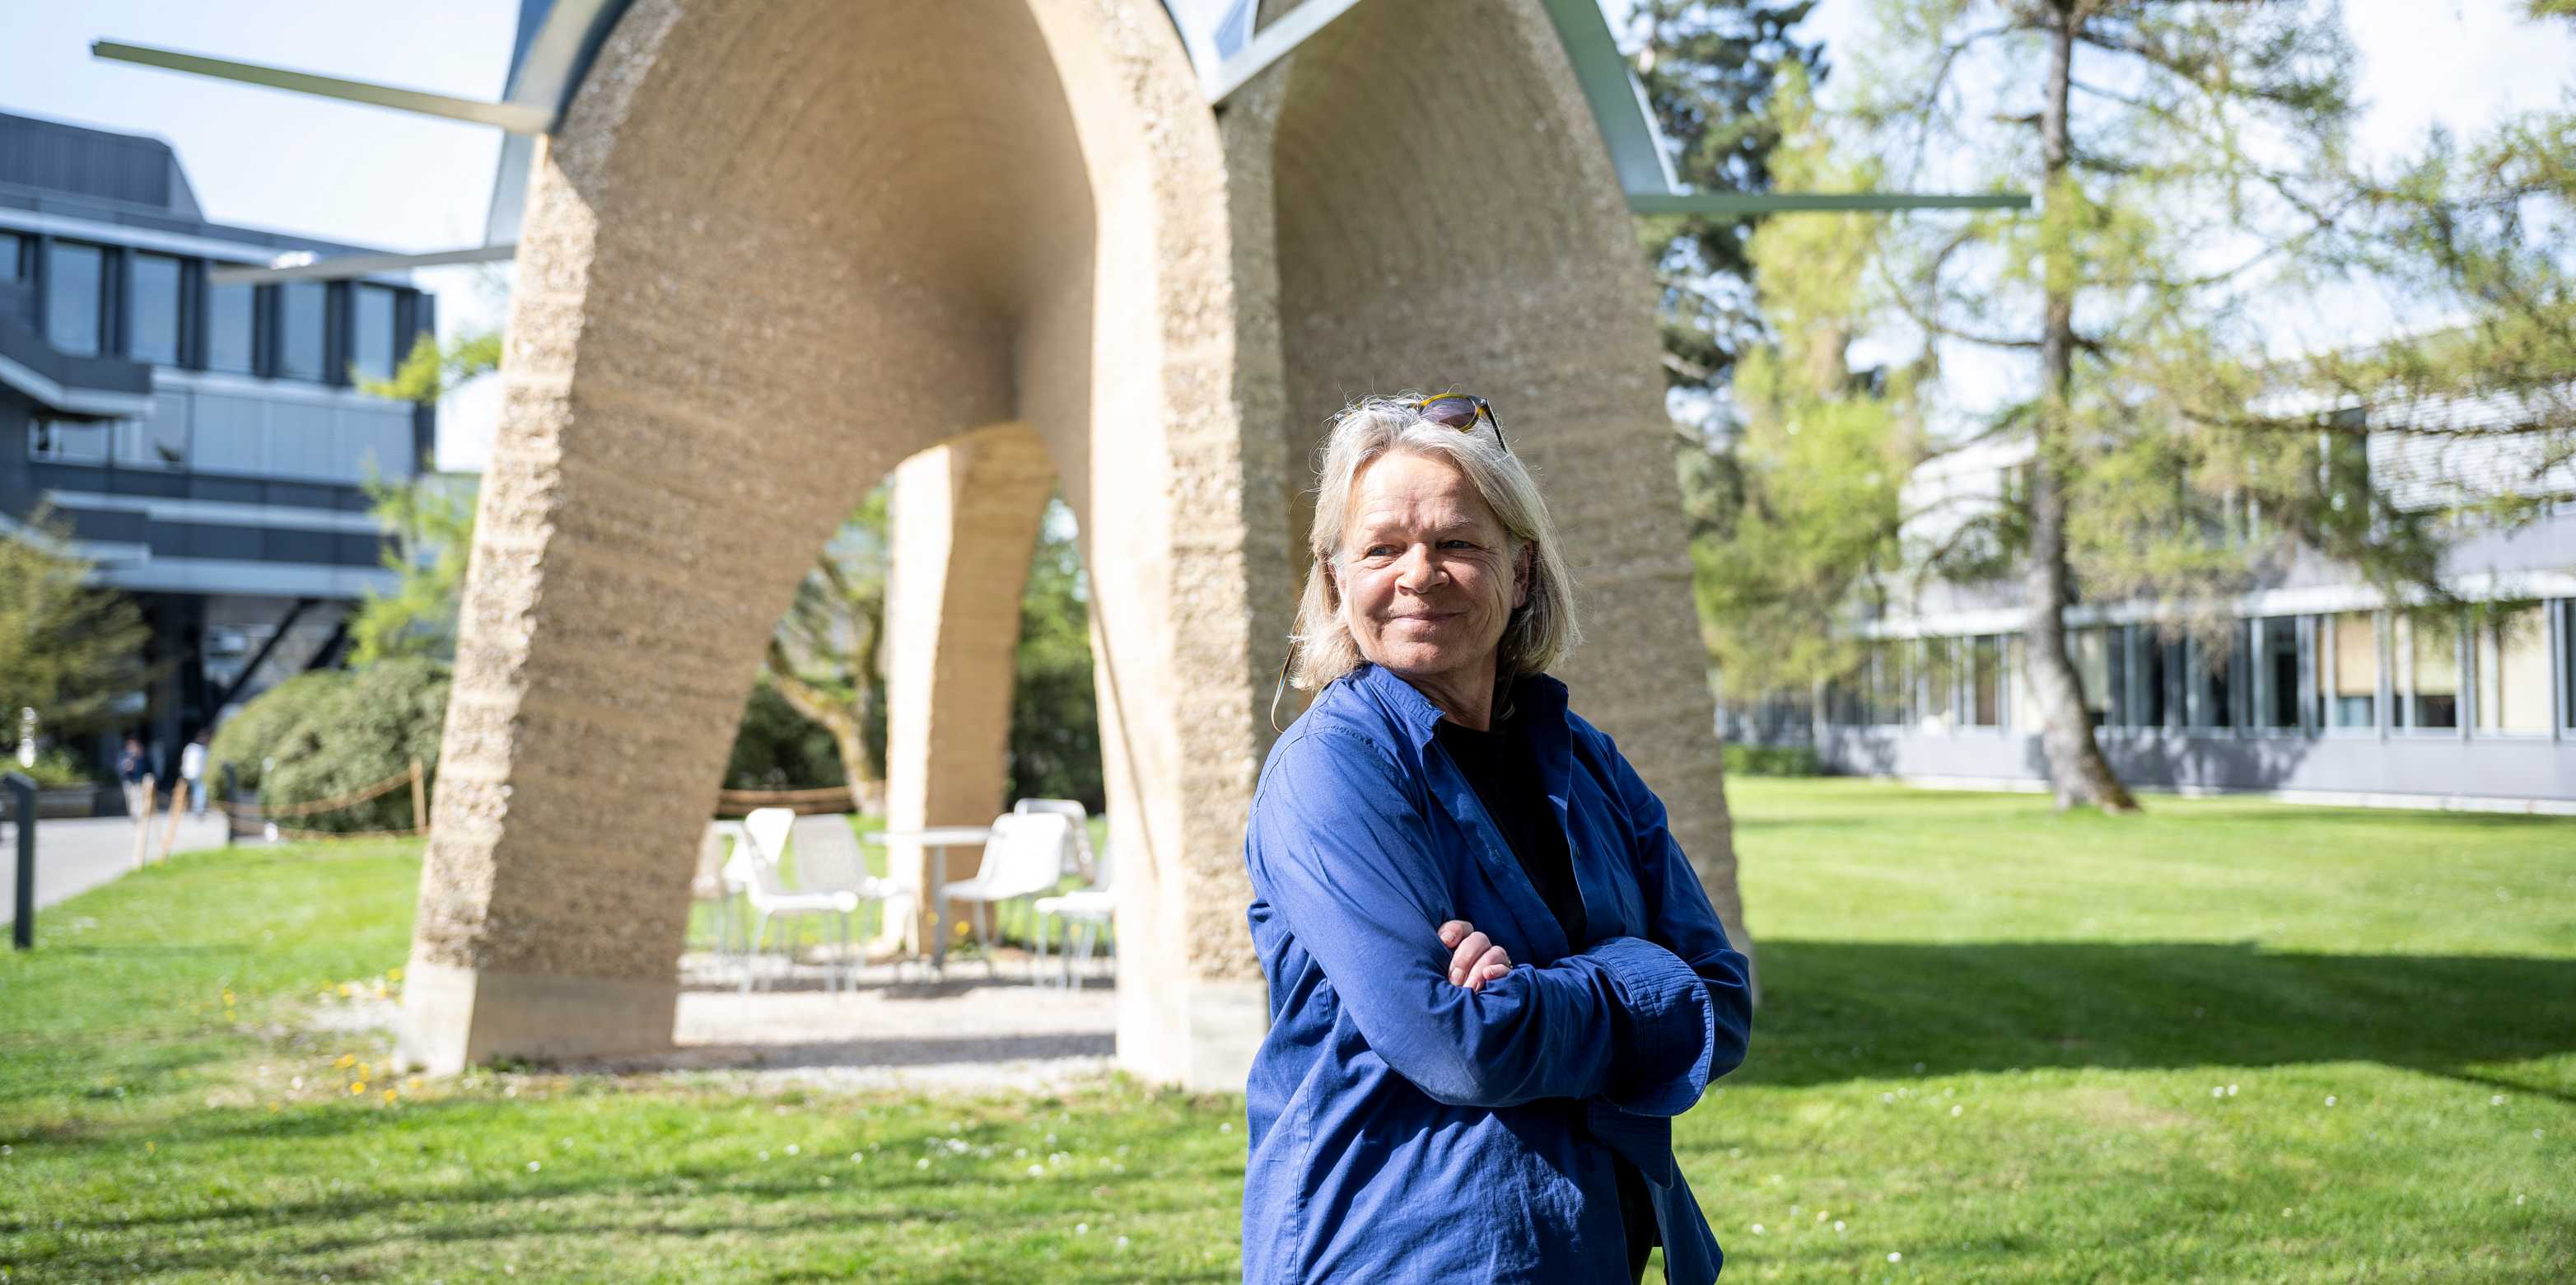 ETH Professor Annette Spiro stands in front of the rammed-earth vault she and her students built on the Hönggerberg campus in 2014